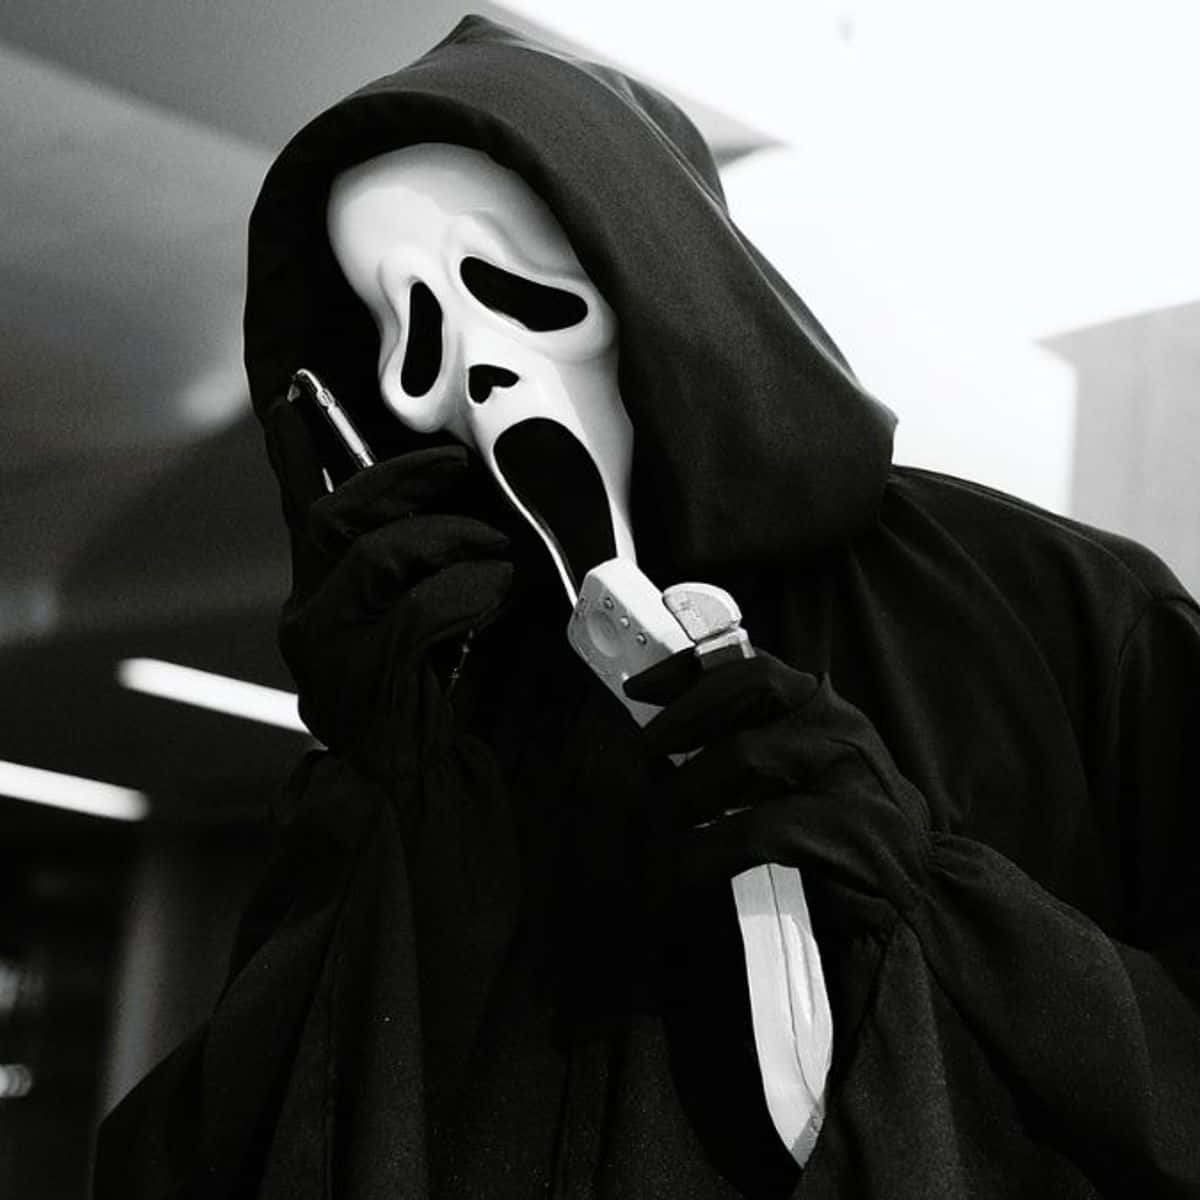 The Iconic Ghostface Mask from the Scream Movie Series